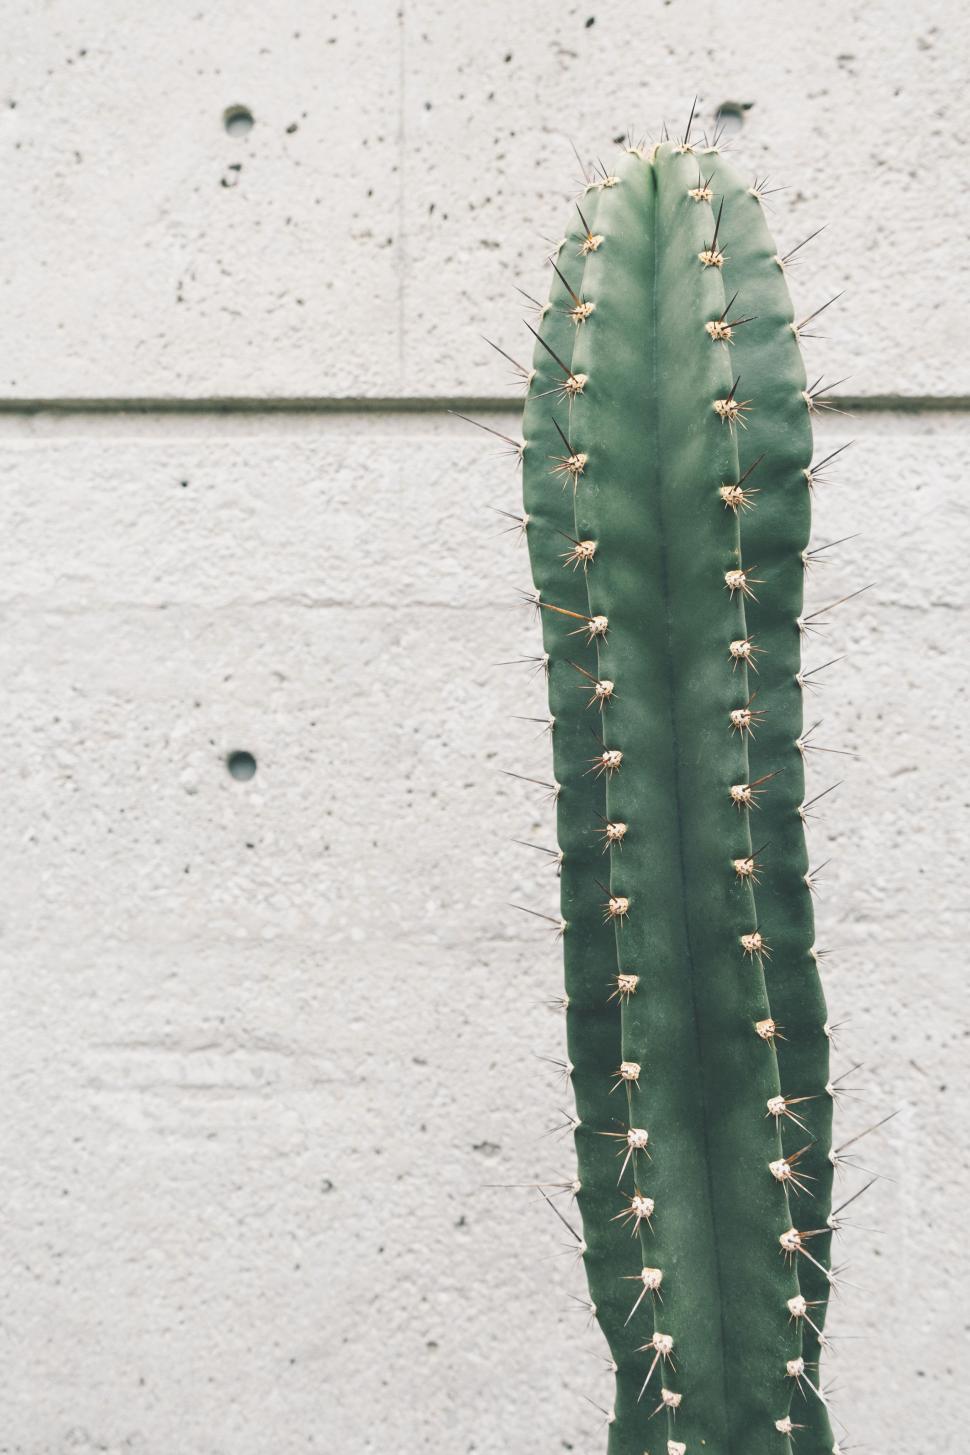 Free Image of Green Cactus Against White Wall 